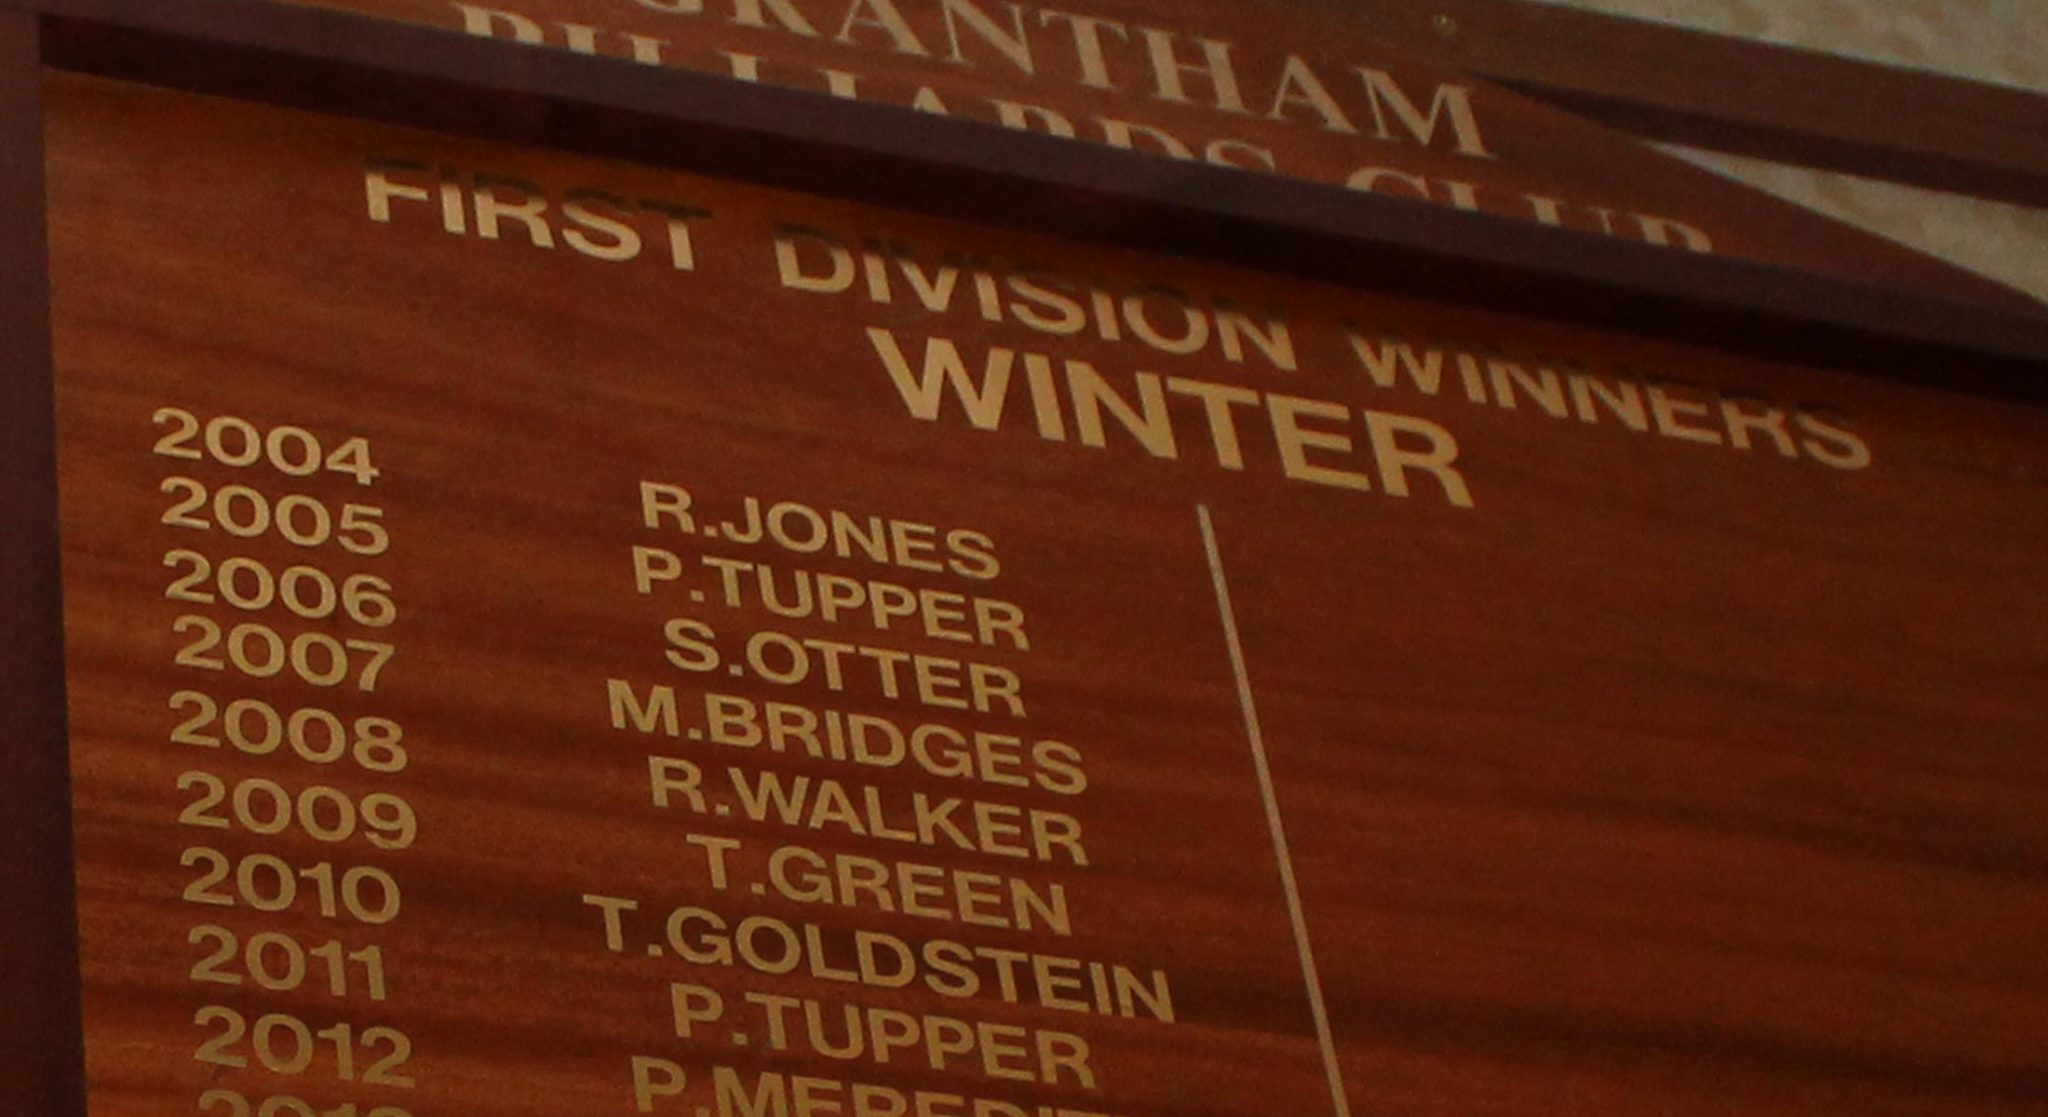 First Division Winners (Winter)